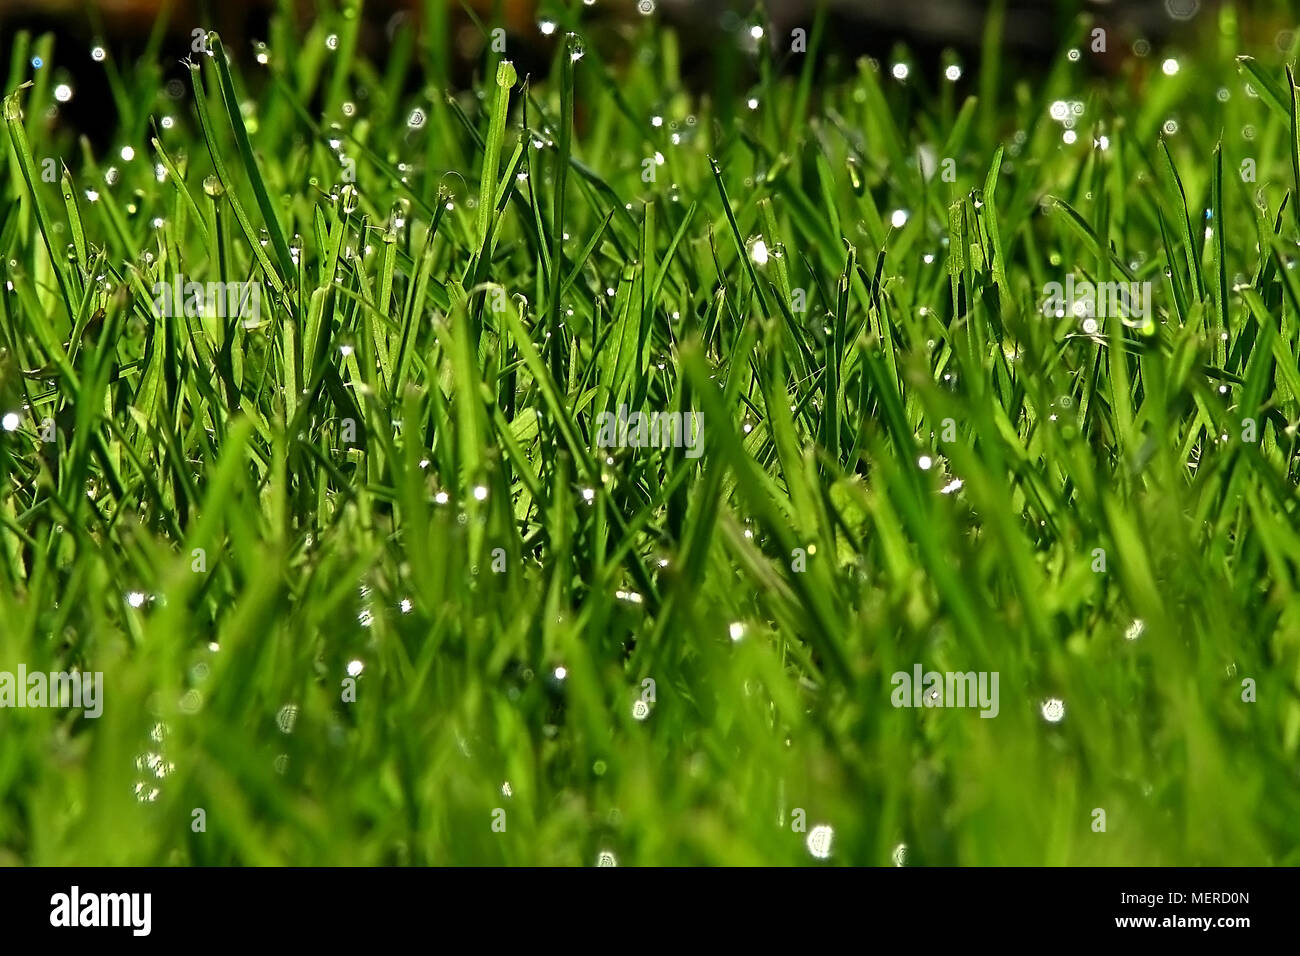 Drops on blades of grass just after the rain Stock Photo